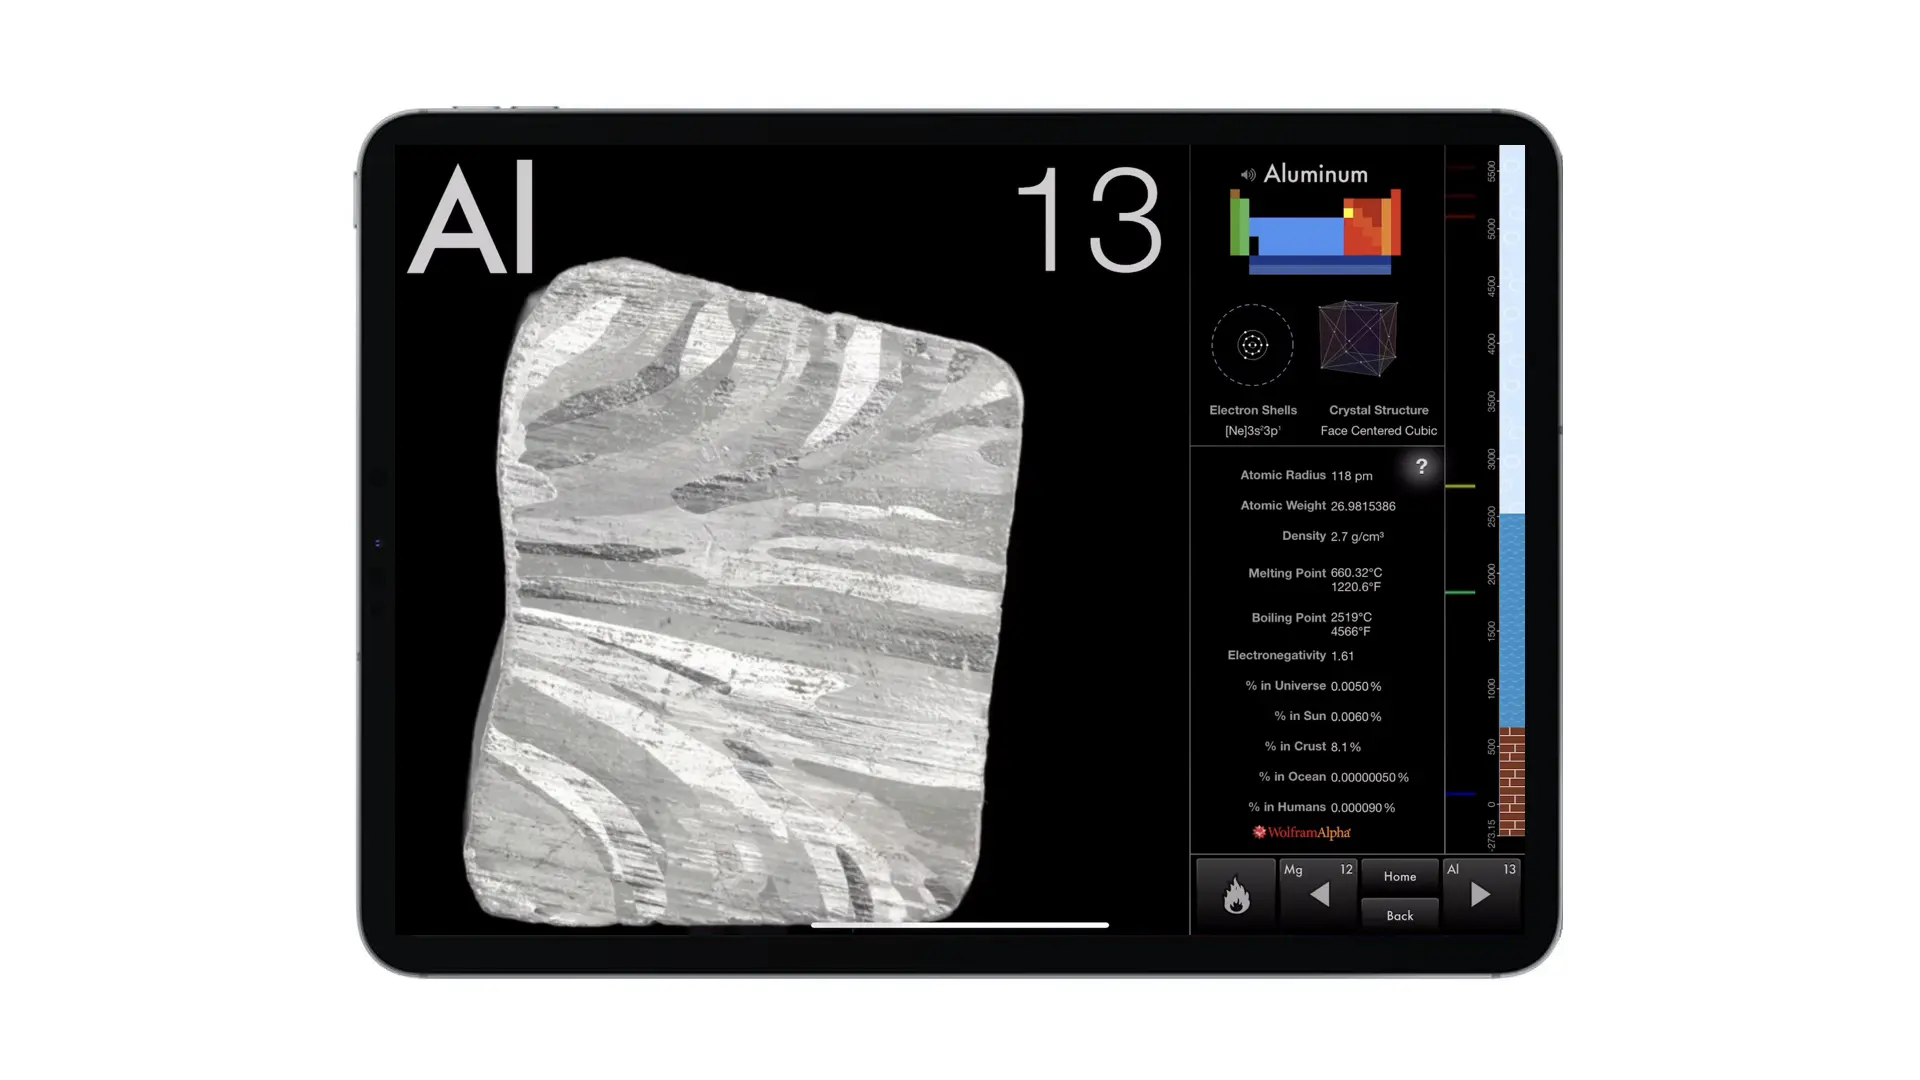 A screenshot from The Elements iPad app showing the various attributes of Aluminum